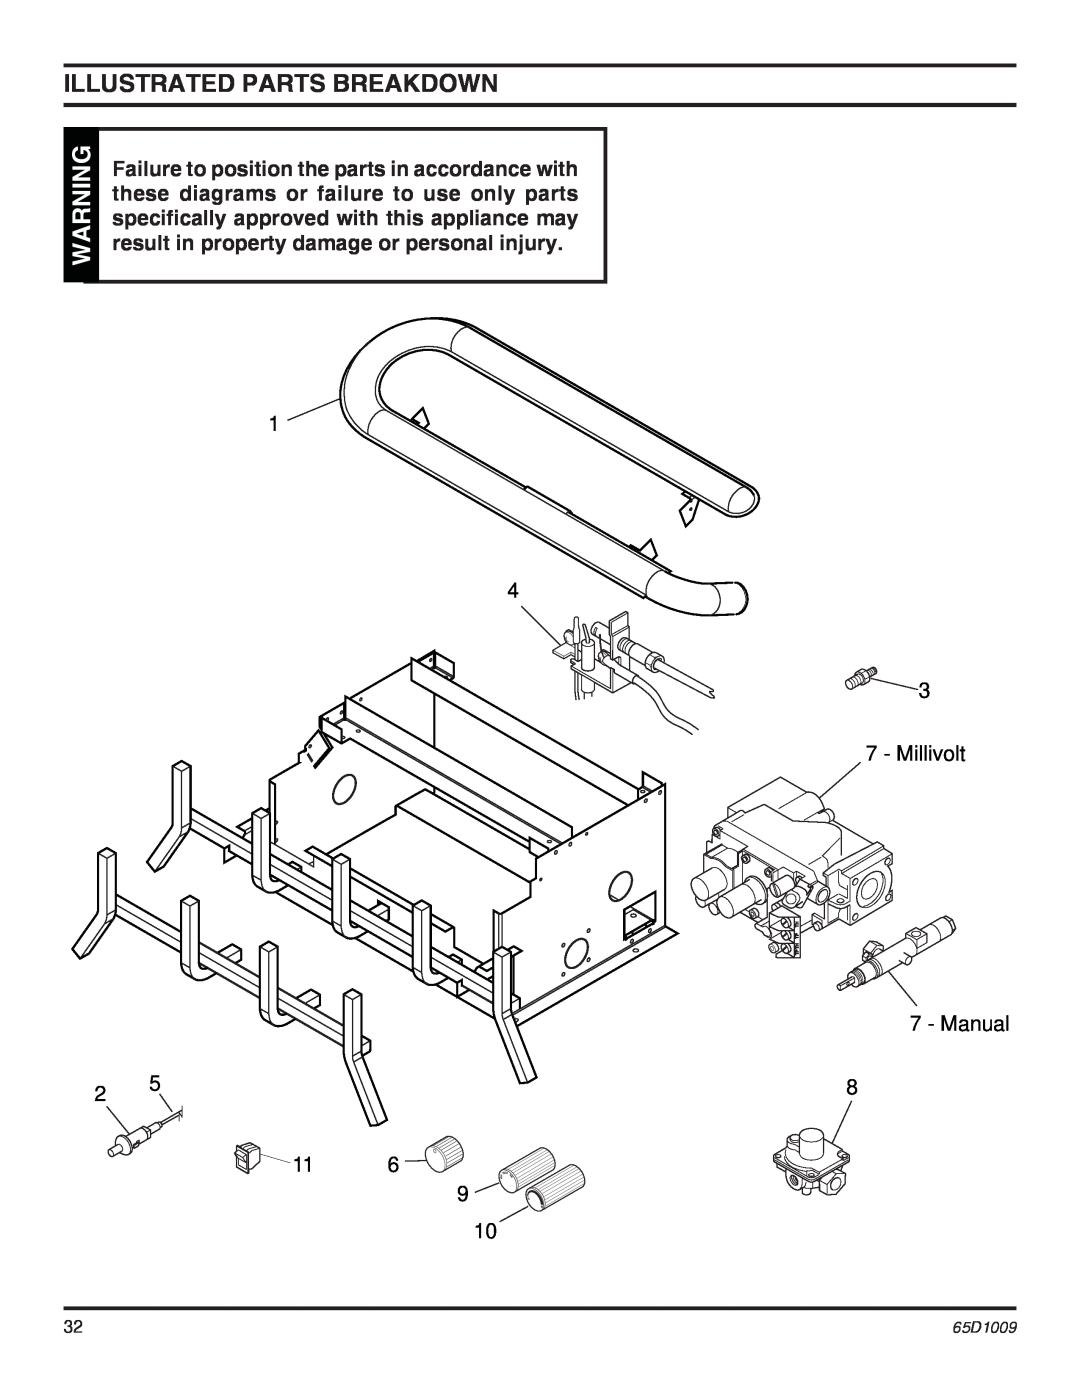 Monessen Hearth EYF24 Illustrated Parts Breakdown, Failure to position the parts in accordance with, 1 4 2 11, 65D1009 